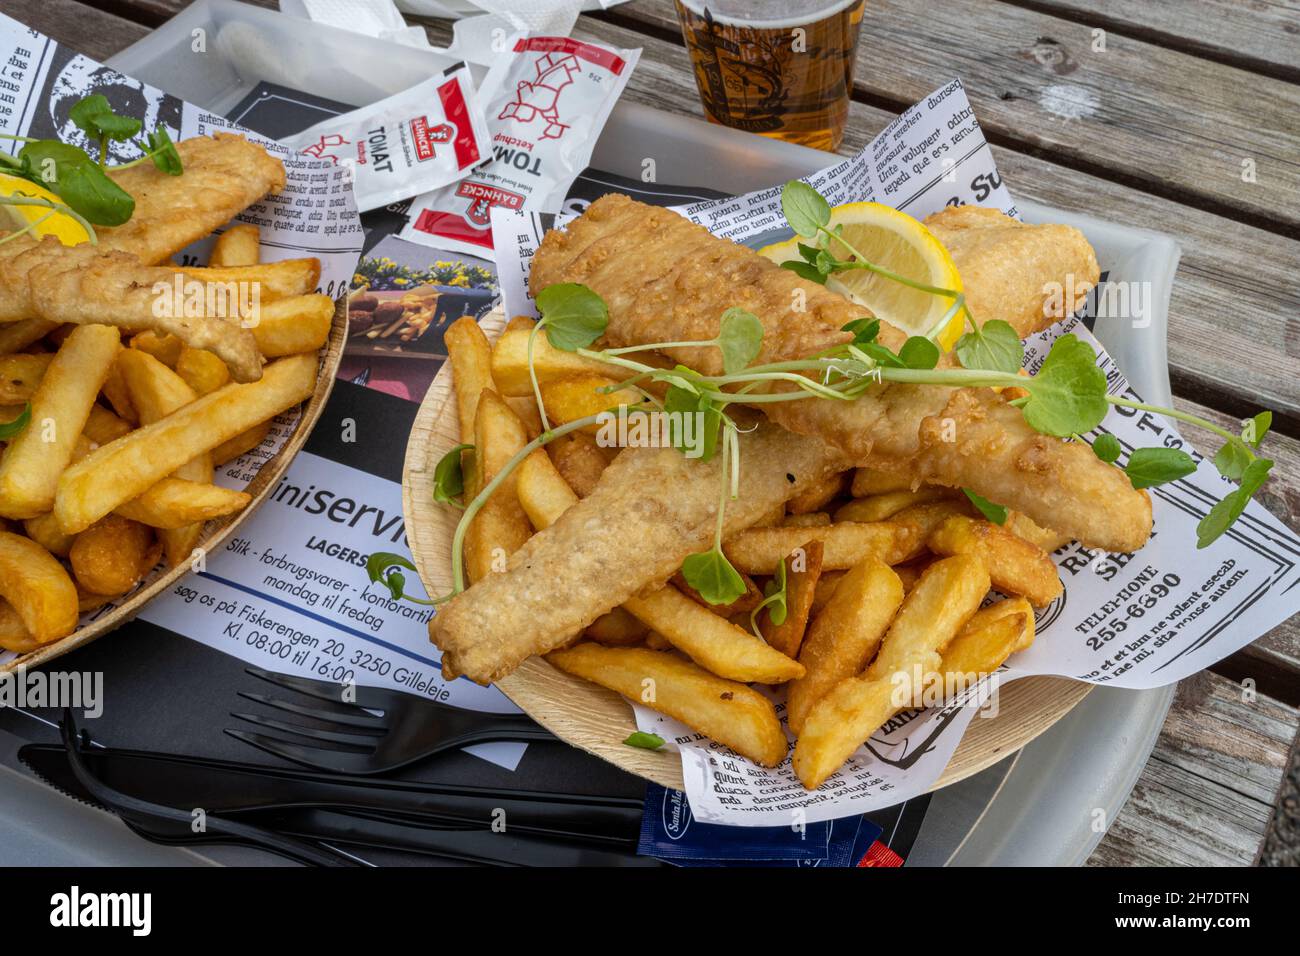 October 10, 2021 - Hundested, Denmark: A plate of delicious fish and chips. Business as usual in the restaurants in the marina Stock Photo